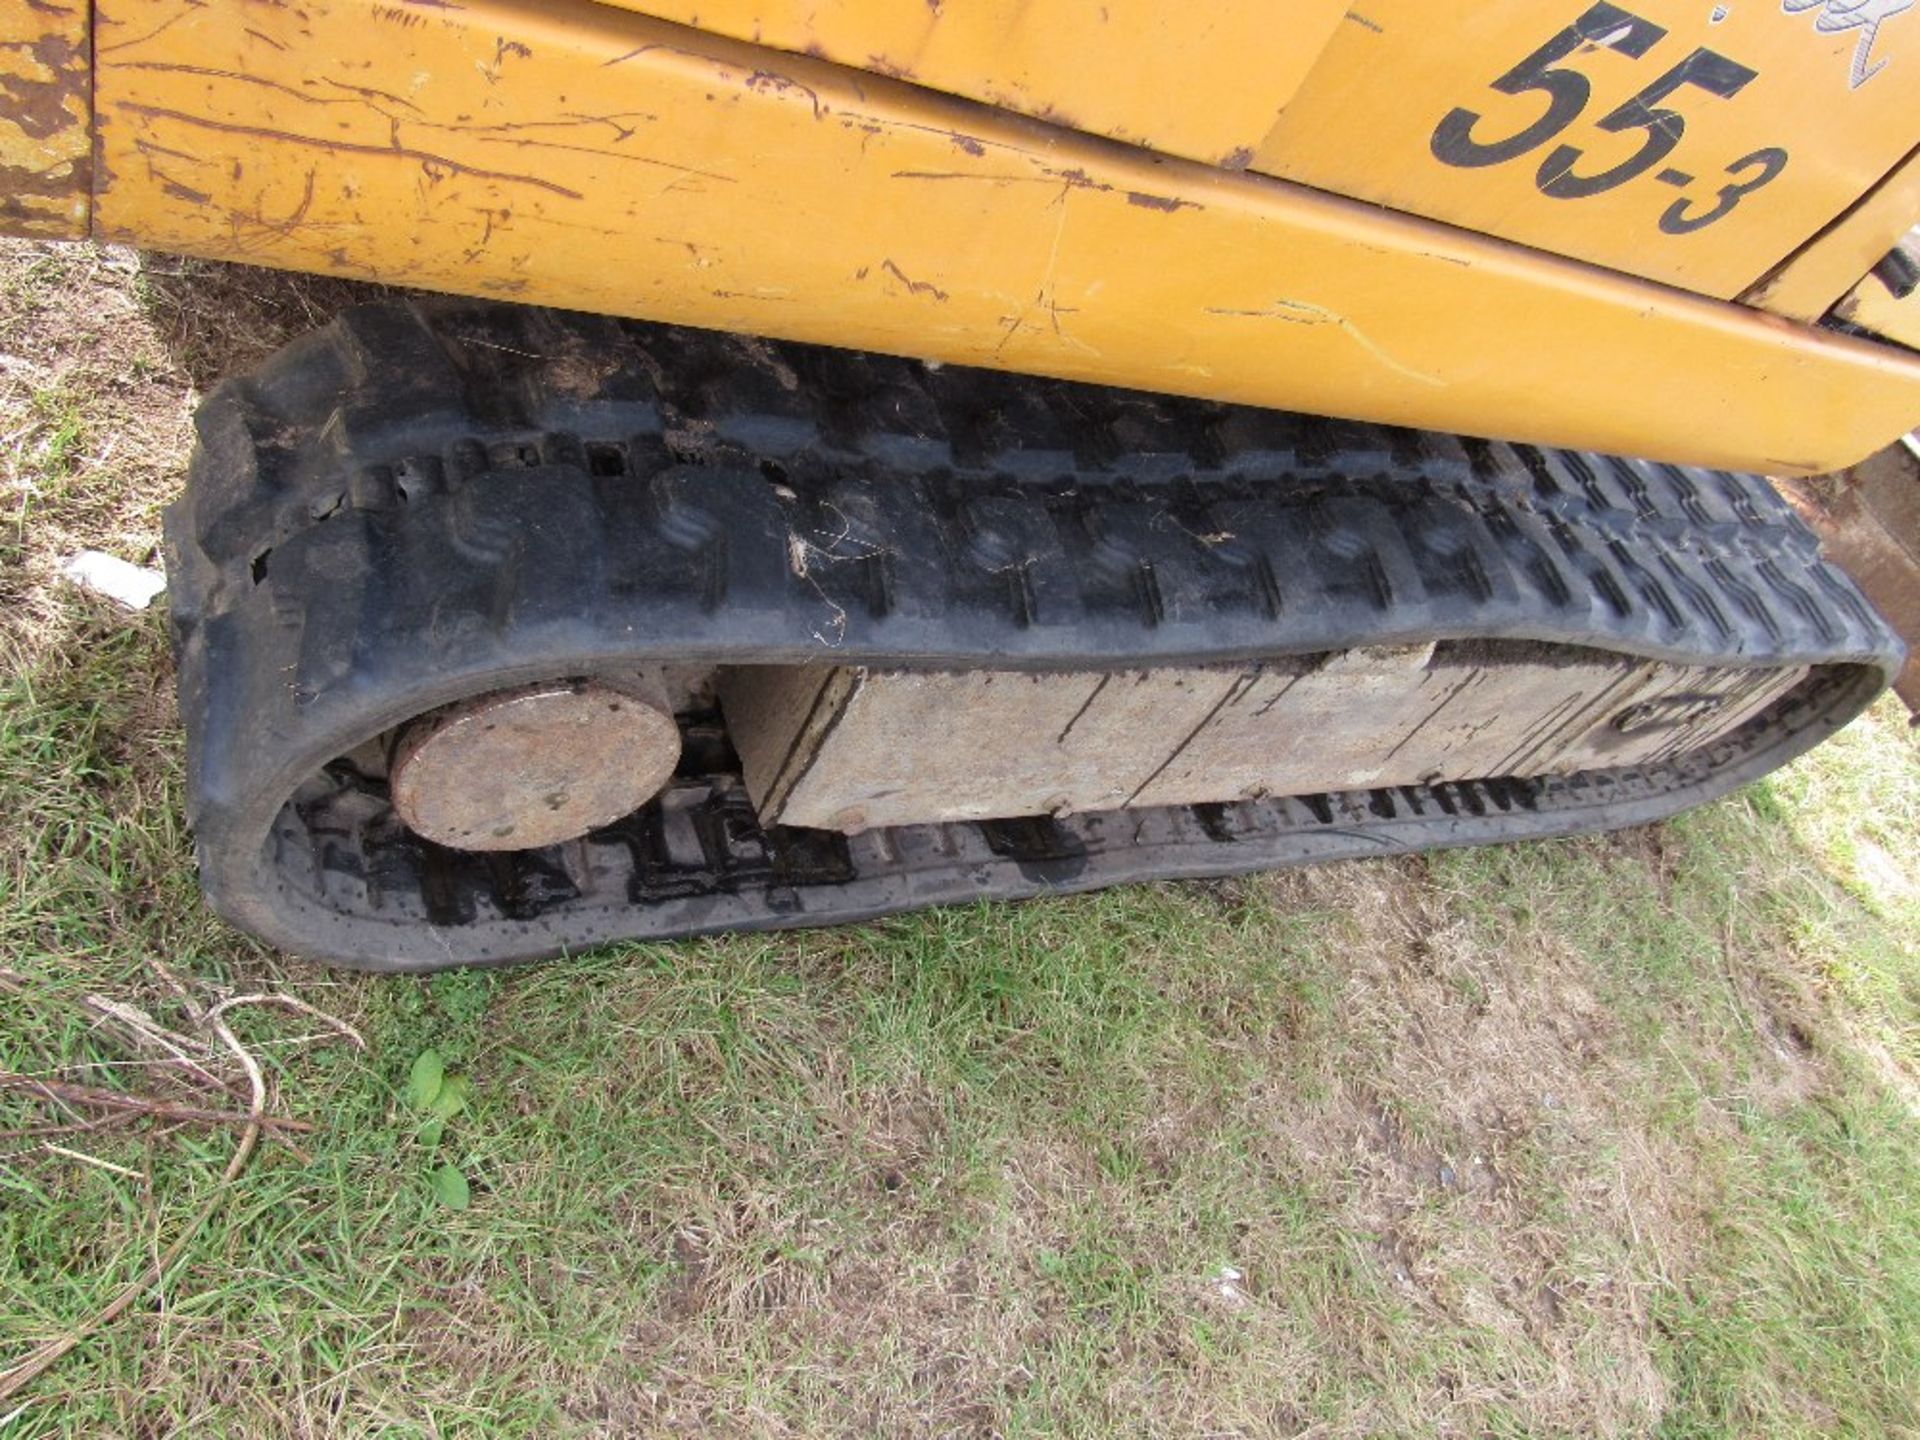 Hyundai 55-3 excavator comes with 3ft ditching bucket, 9" trench bucket, - Image 4 of 10